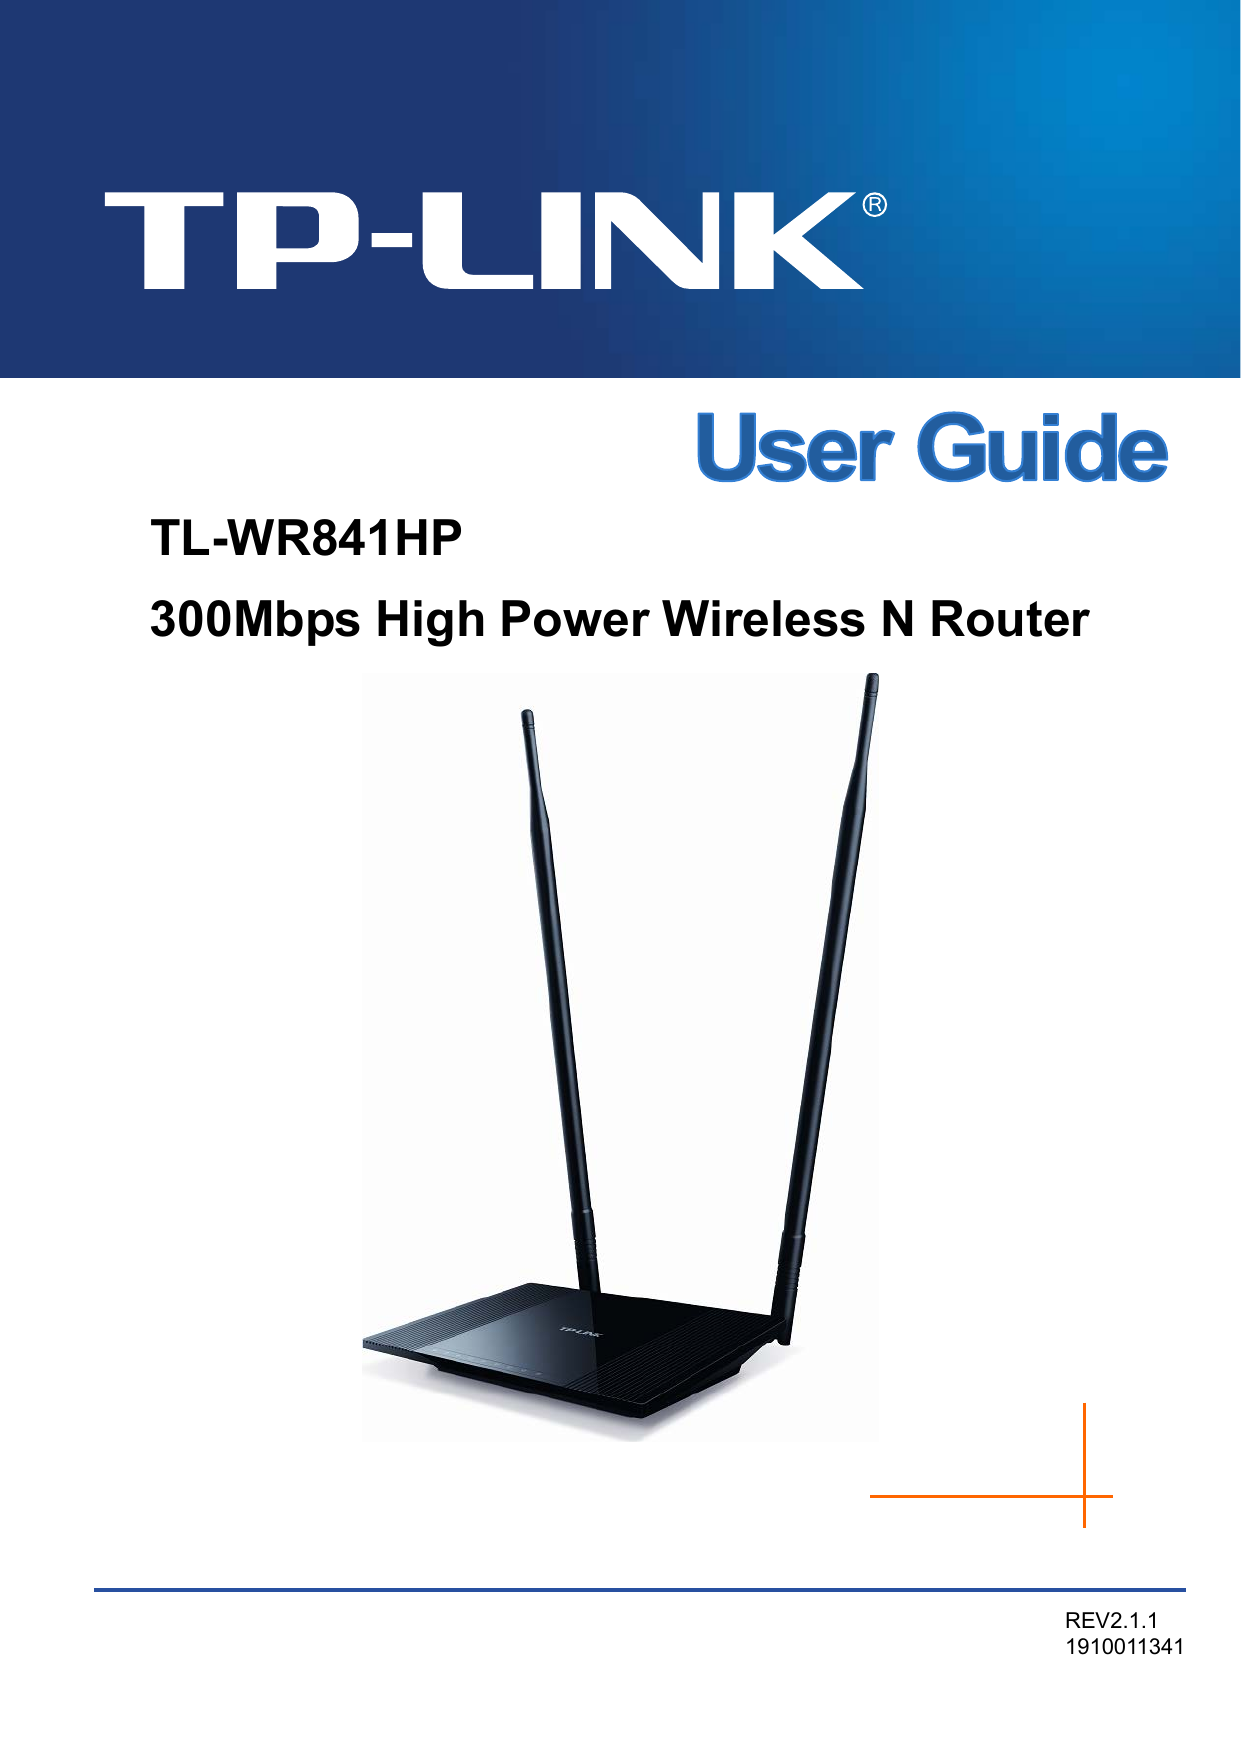      TL-WR841HP 300Mbps High Power Wireless N Router     REV2.1.1 1910011341 